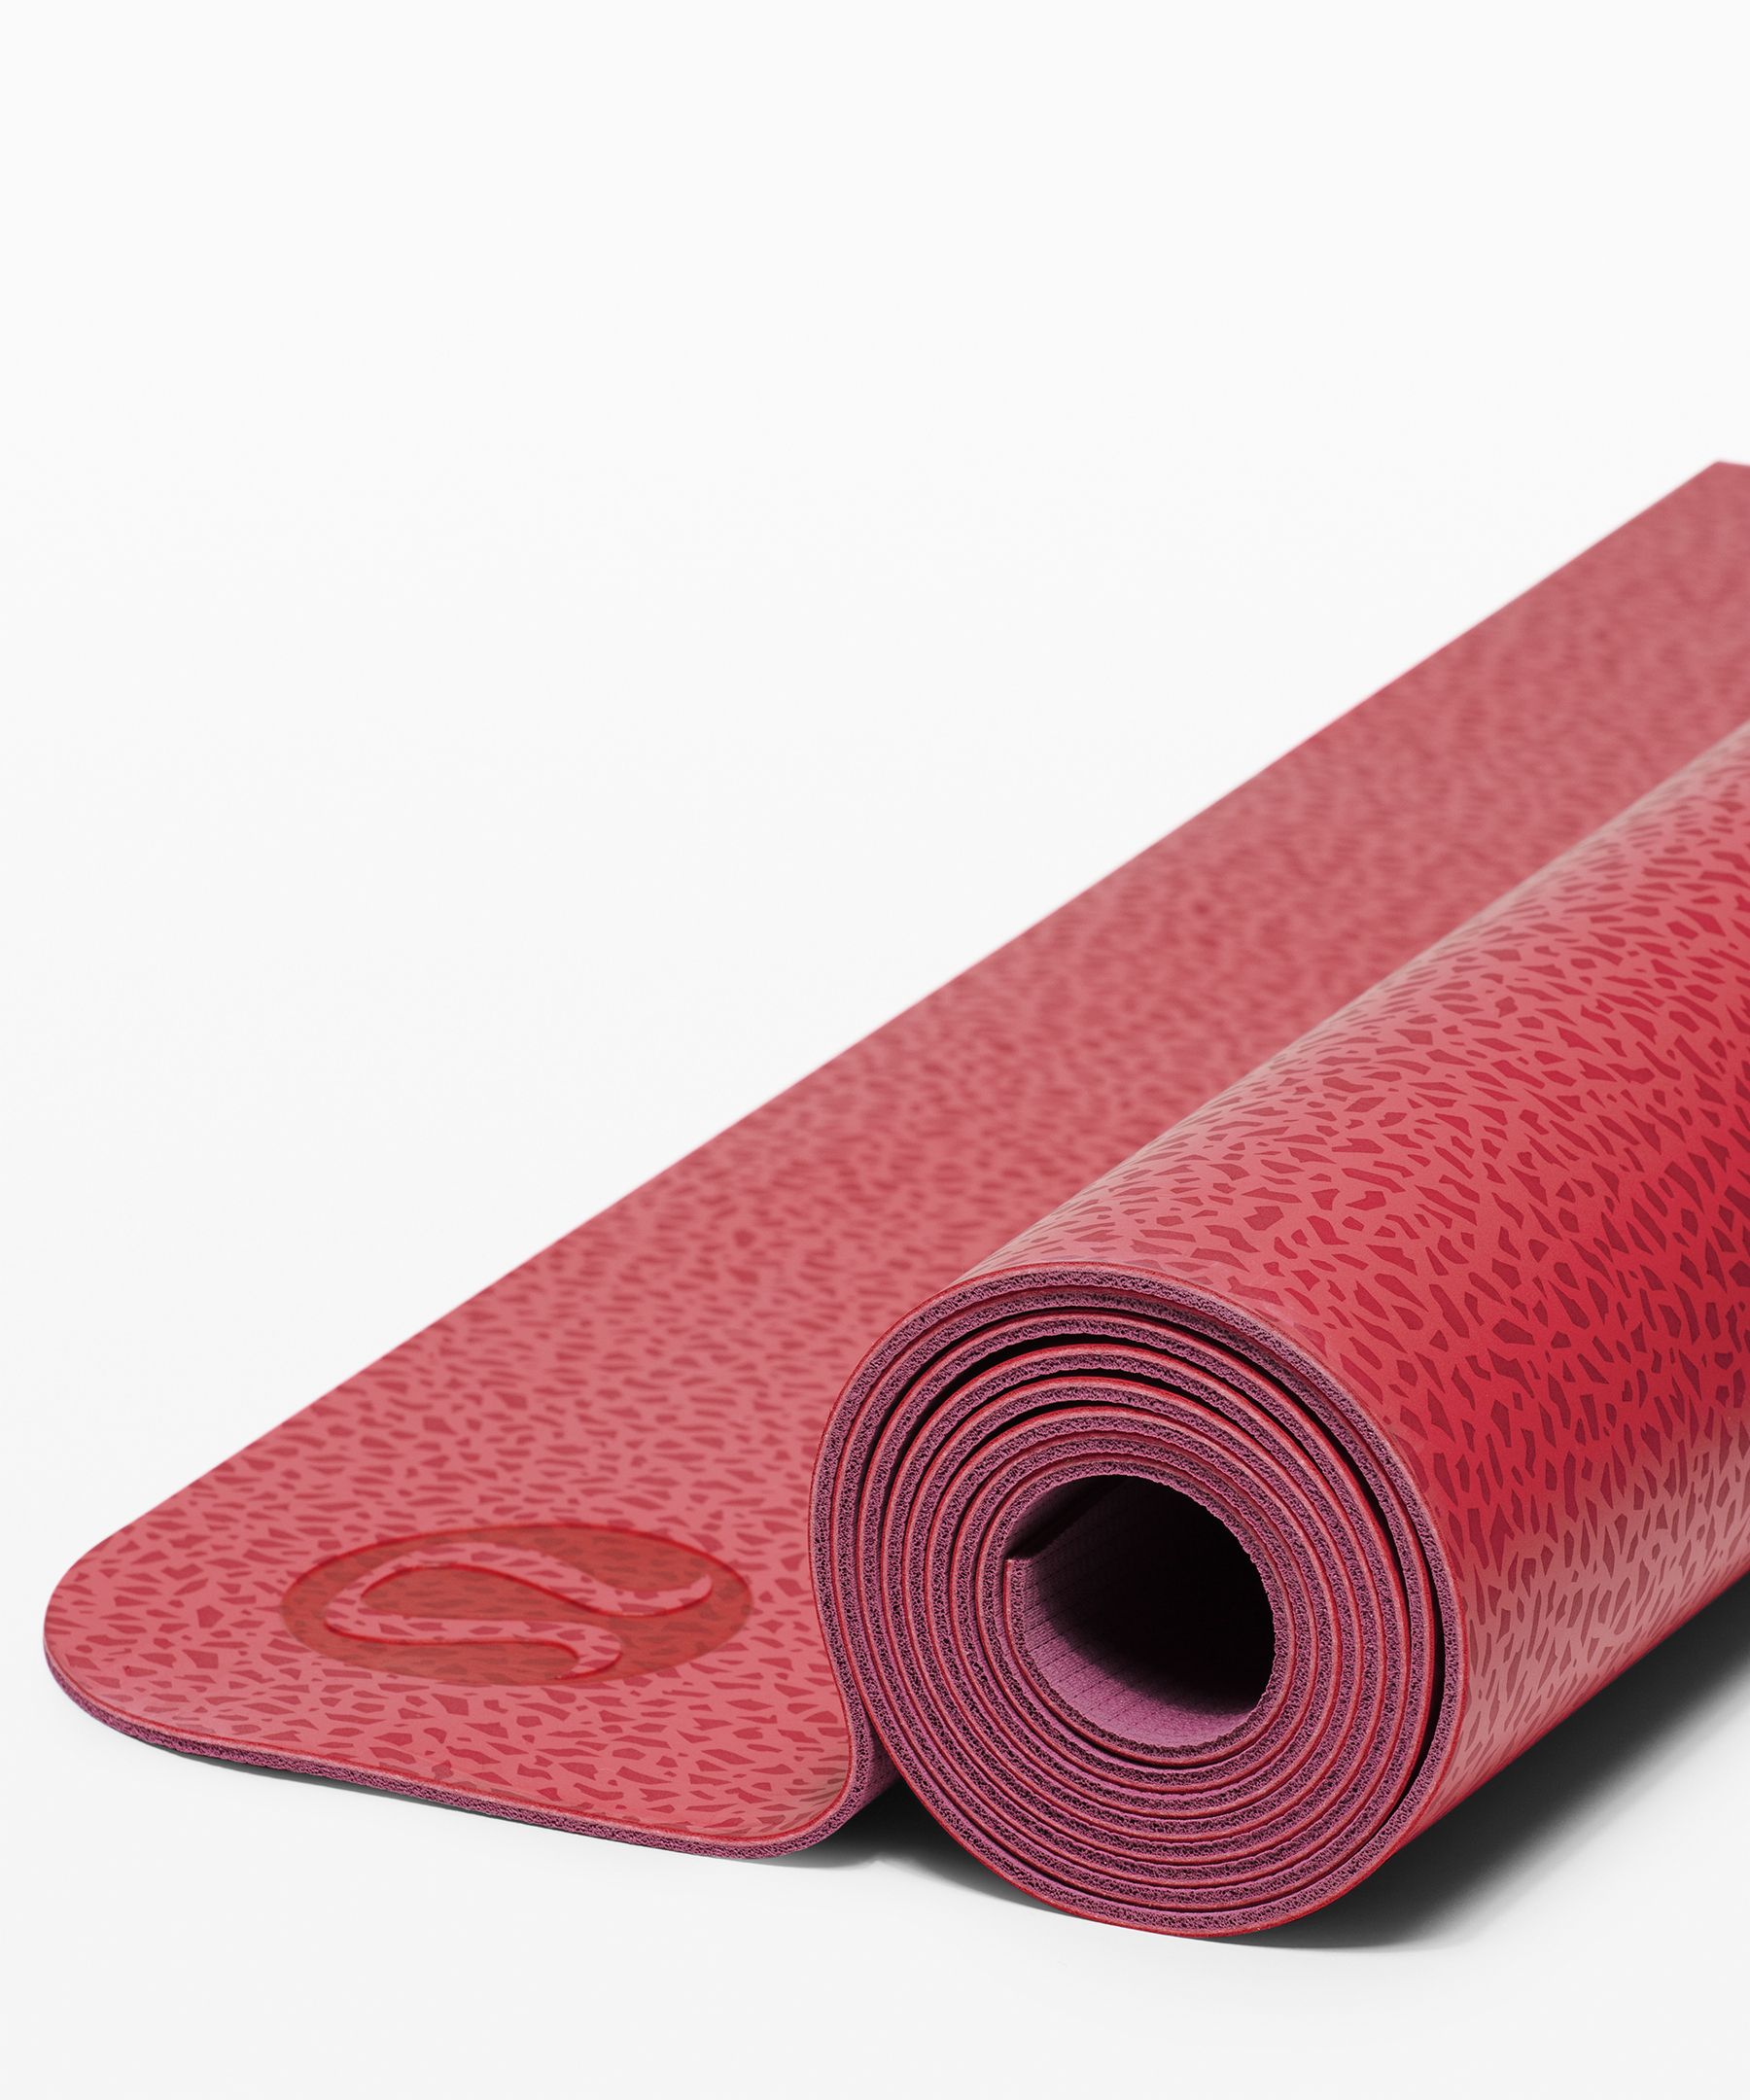 lululemon reversible mat which side